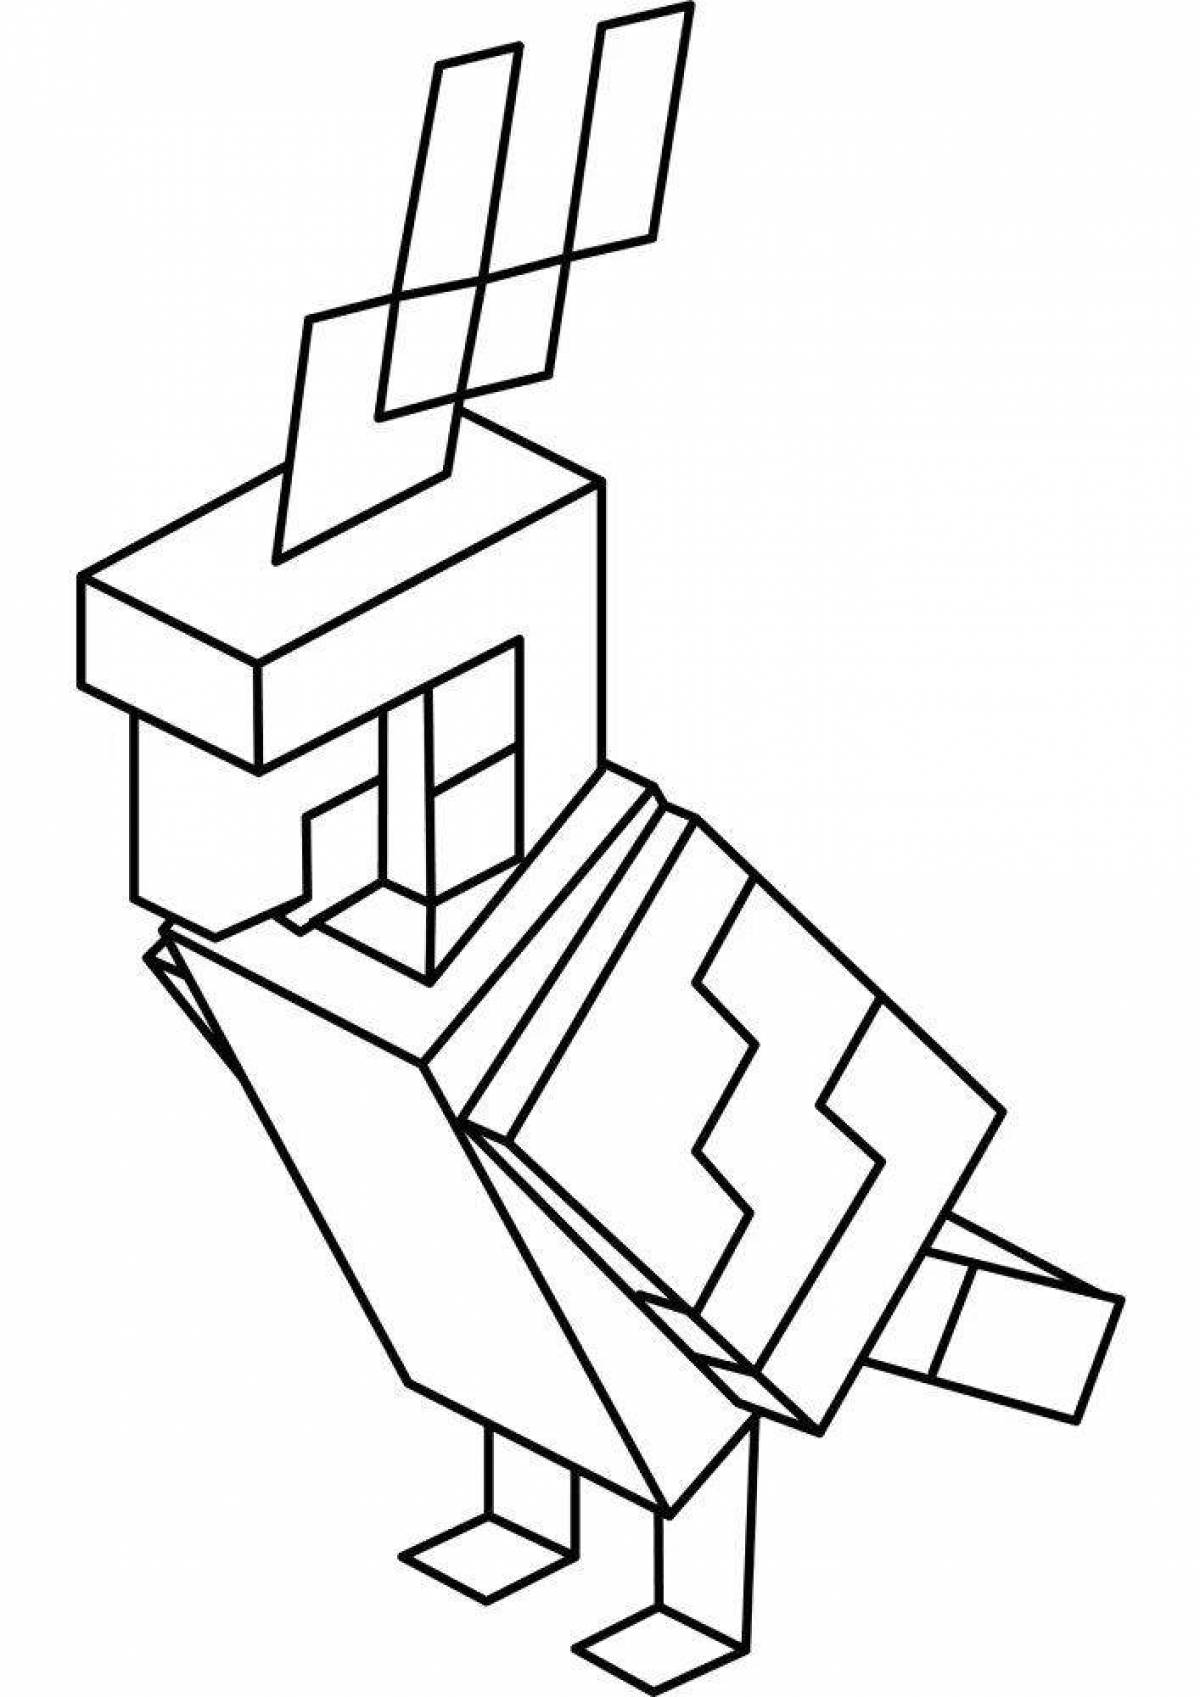 Awesome minecraft ship coloring page